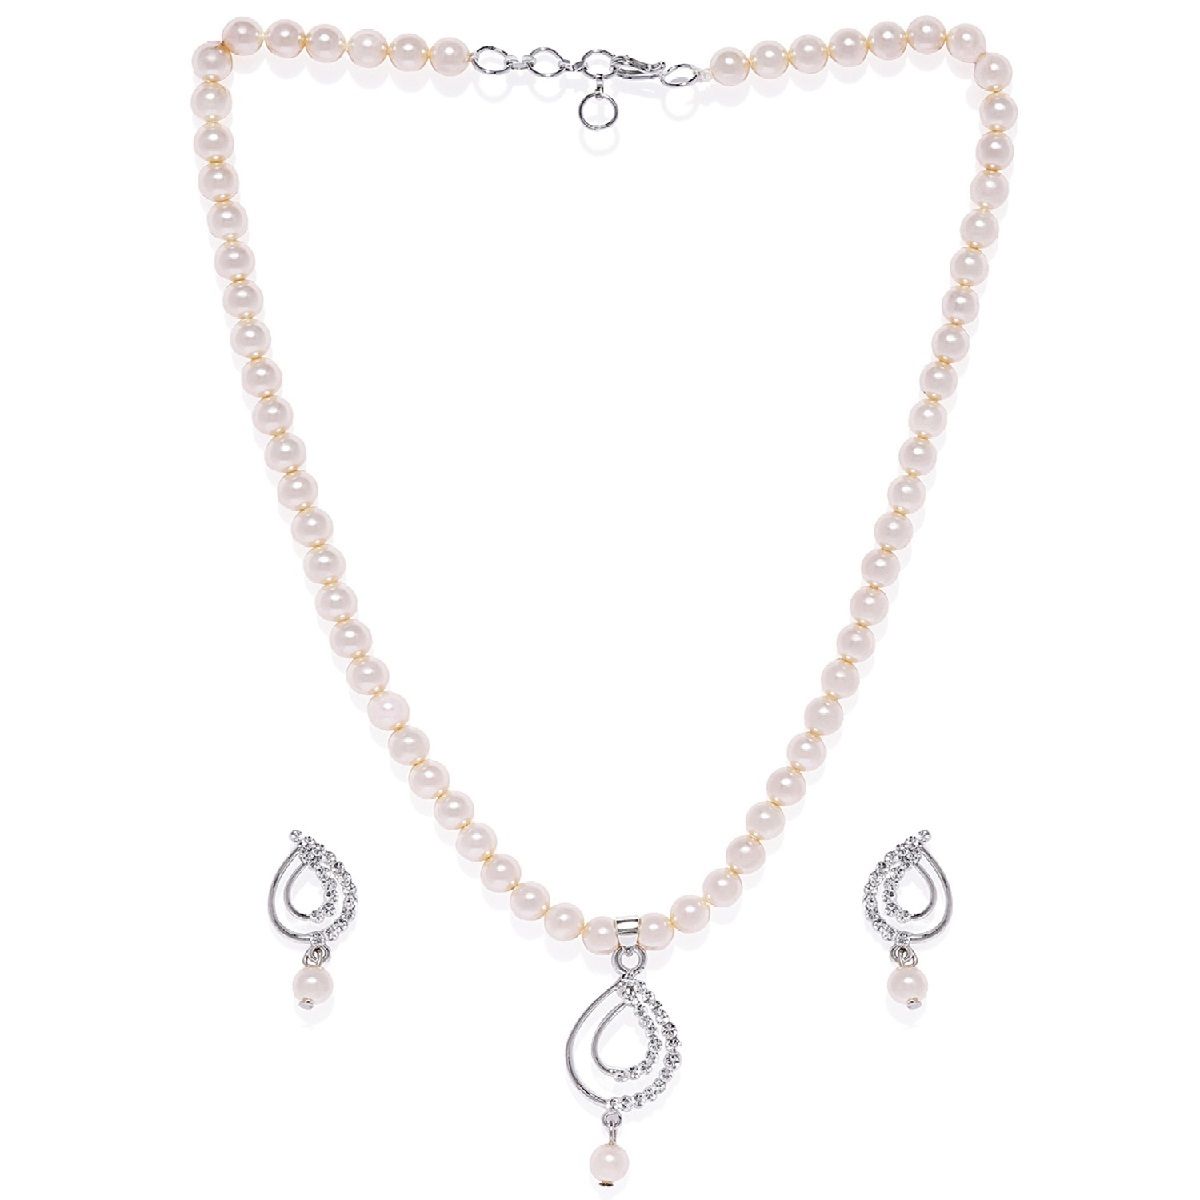 Bronze Swarovski crystal pearl chain necklace earrings set at ₹1750 | Azilaa